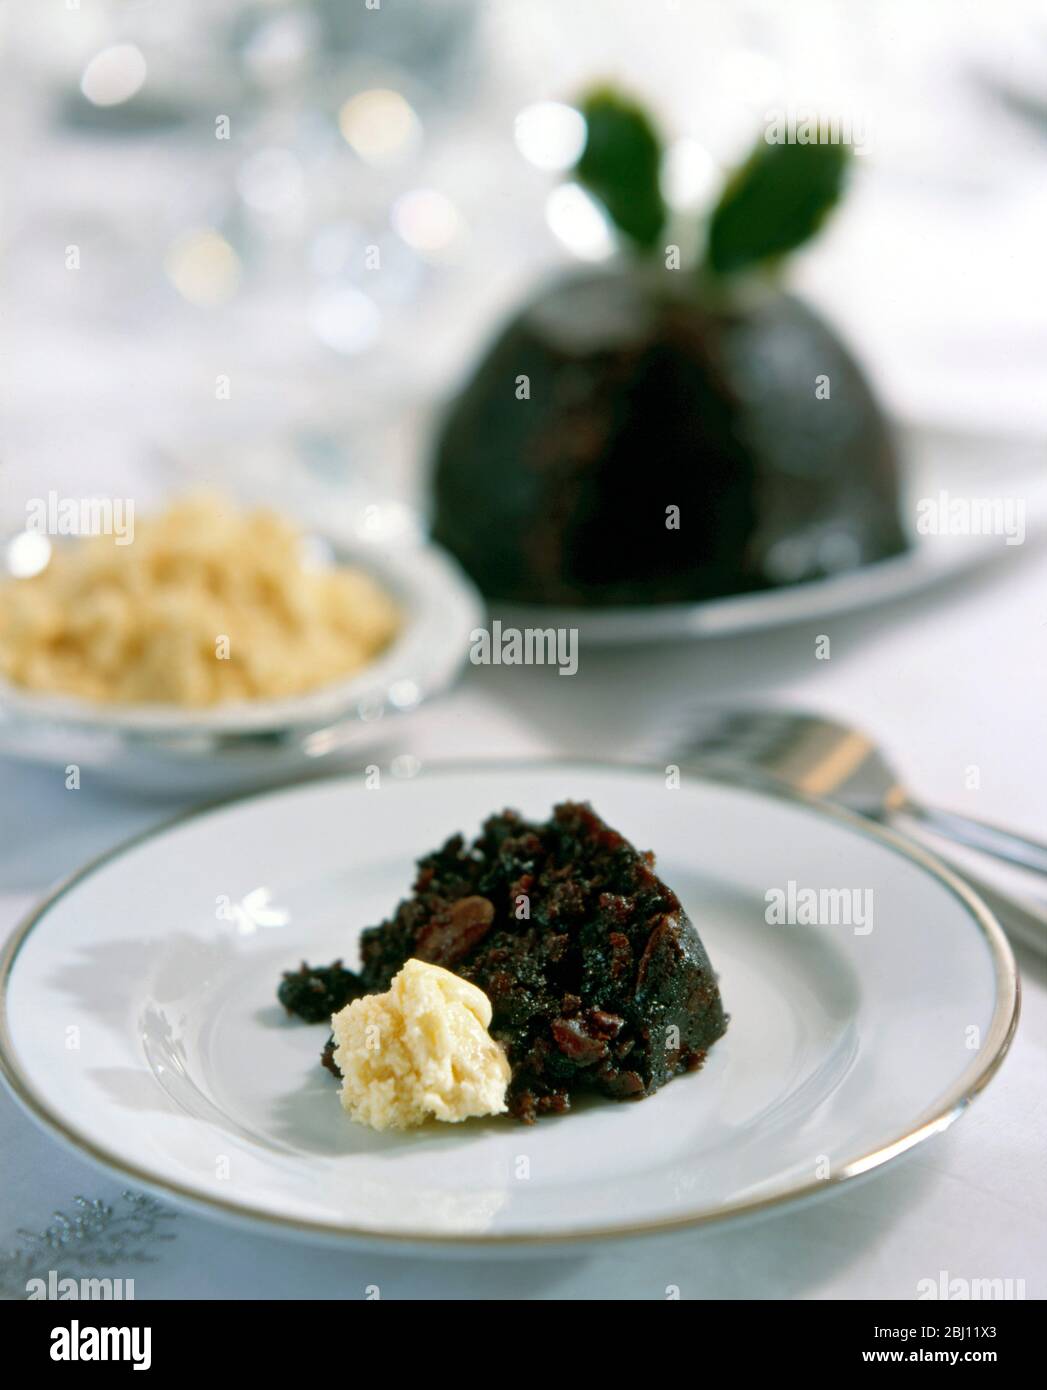 Traditional Christmas pudding on white plate in formal setting - Stock Photo